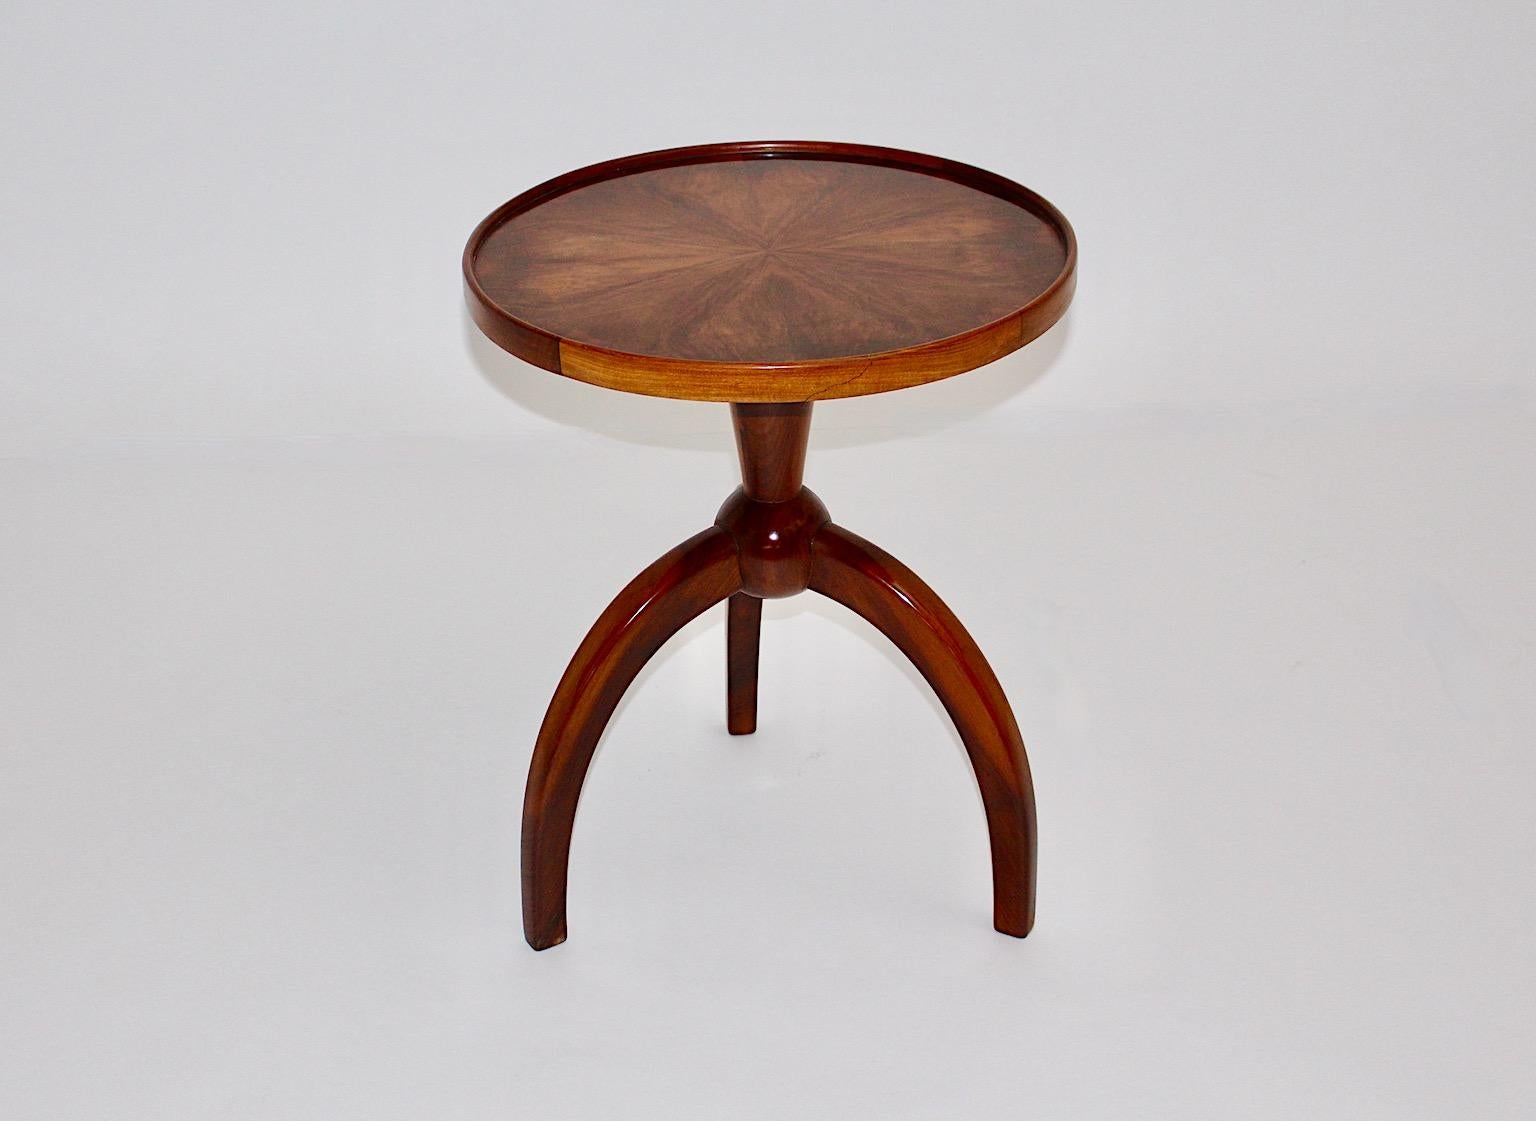 Art Deco vintage side table from walnut Wiener Möbel Viennese Living in the cercle of Josef Frank attributed to Walter Sobotka circa 1928 Vienna.
The handmade and high quality side table shows a gorgeous base with three curved legs and a round ball